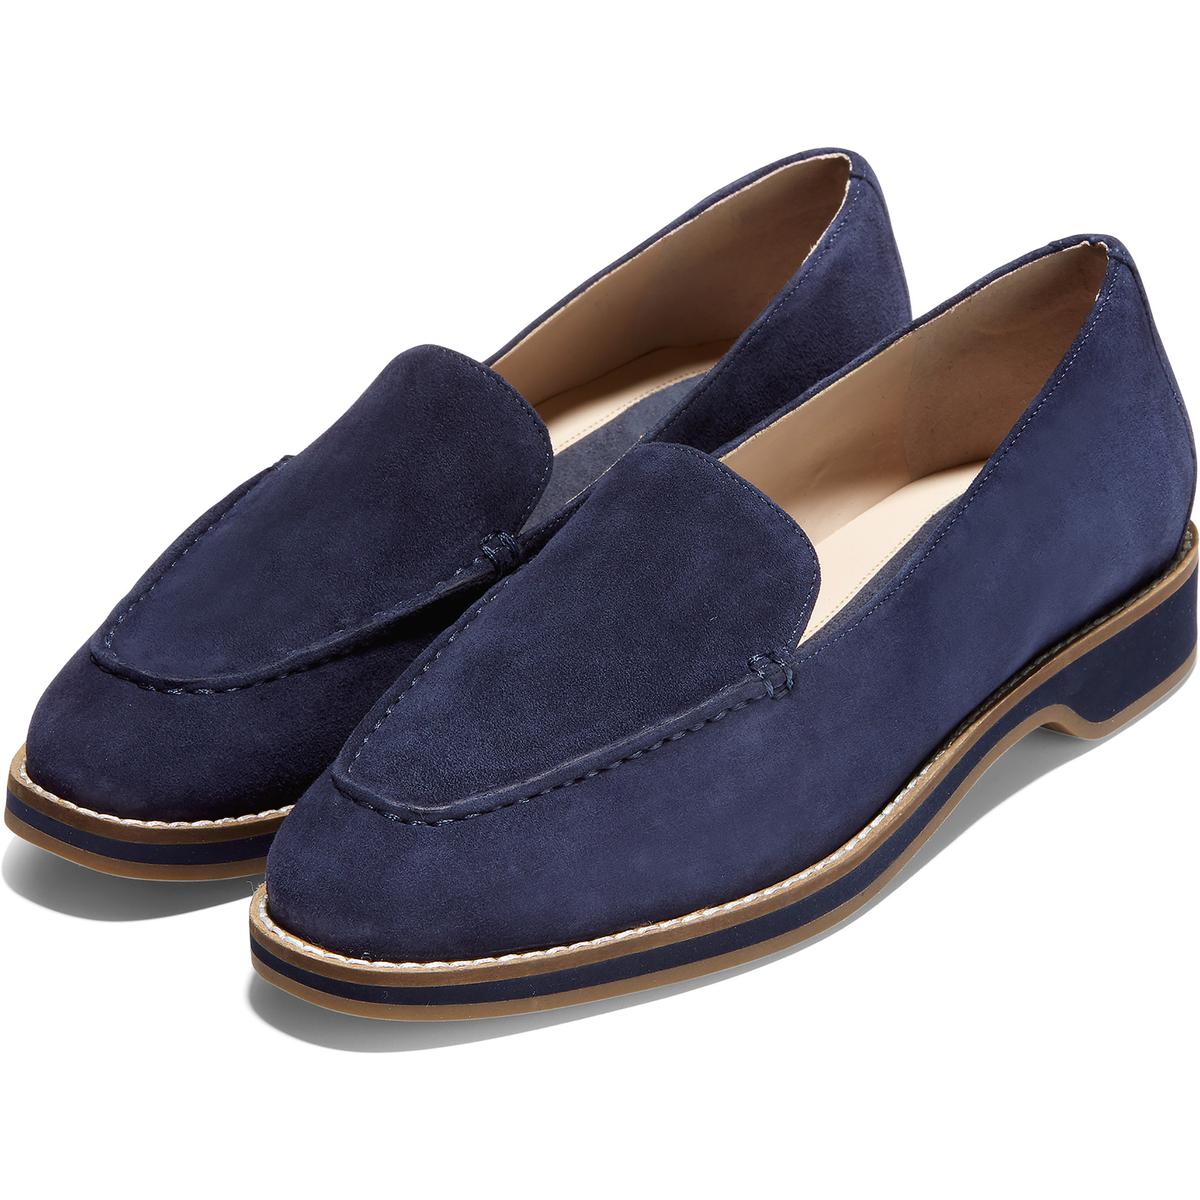 Cole Haan Womens The Go-To Slip On Flat Moccasins Loafers Shoes BHFO ...